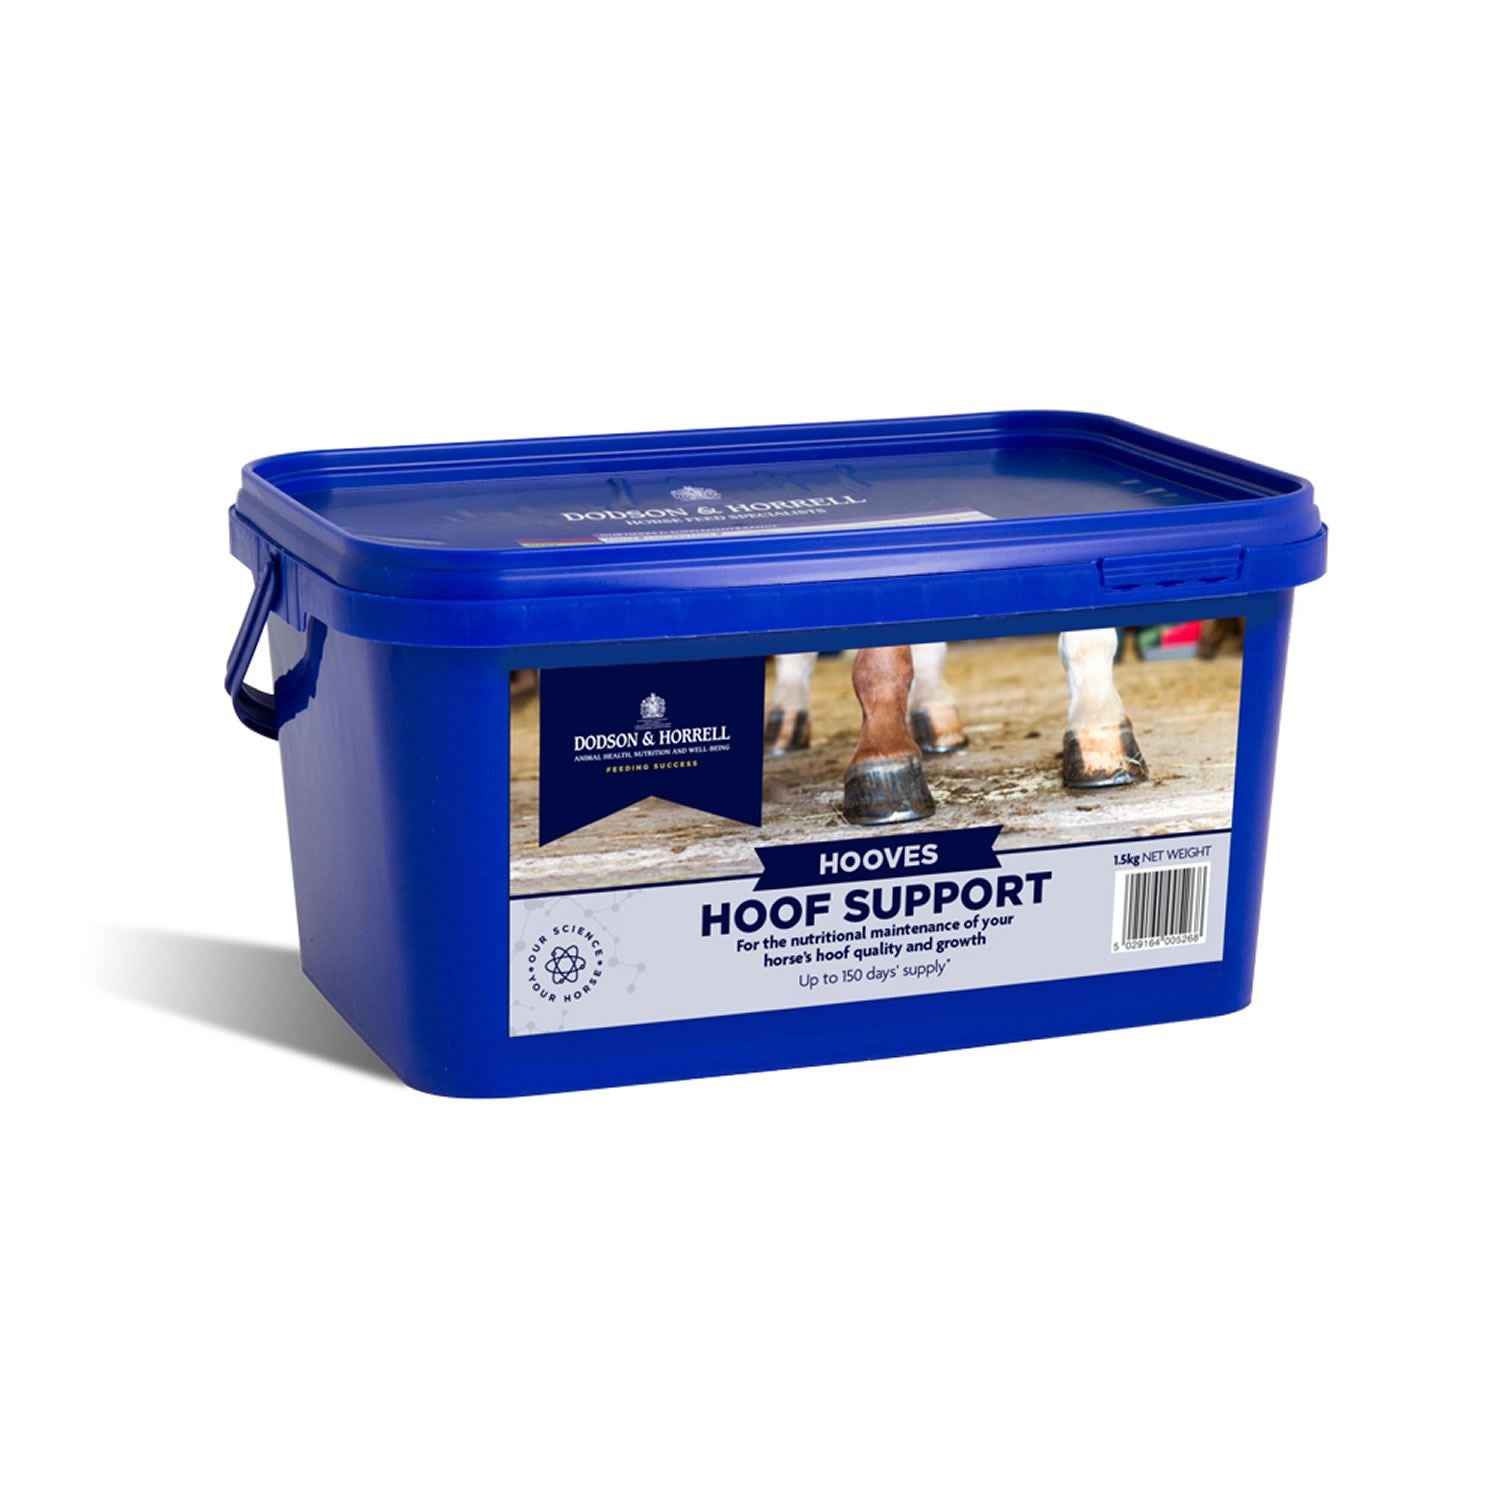 Ensure hoof quality with Dodson & Horrell Hoof Support, rich in essential fatty acids